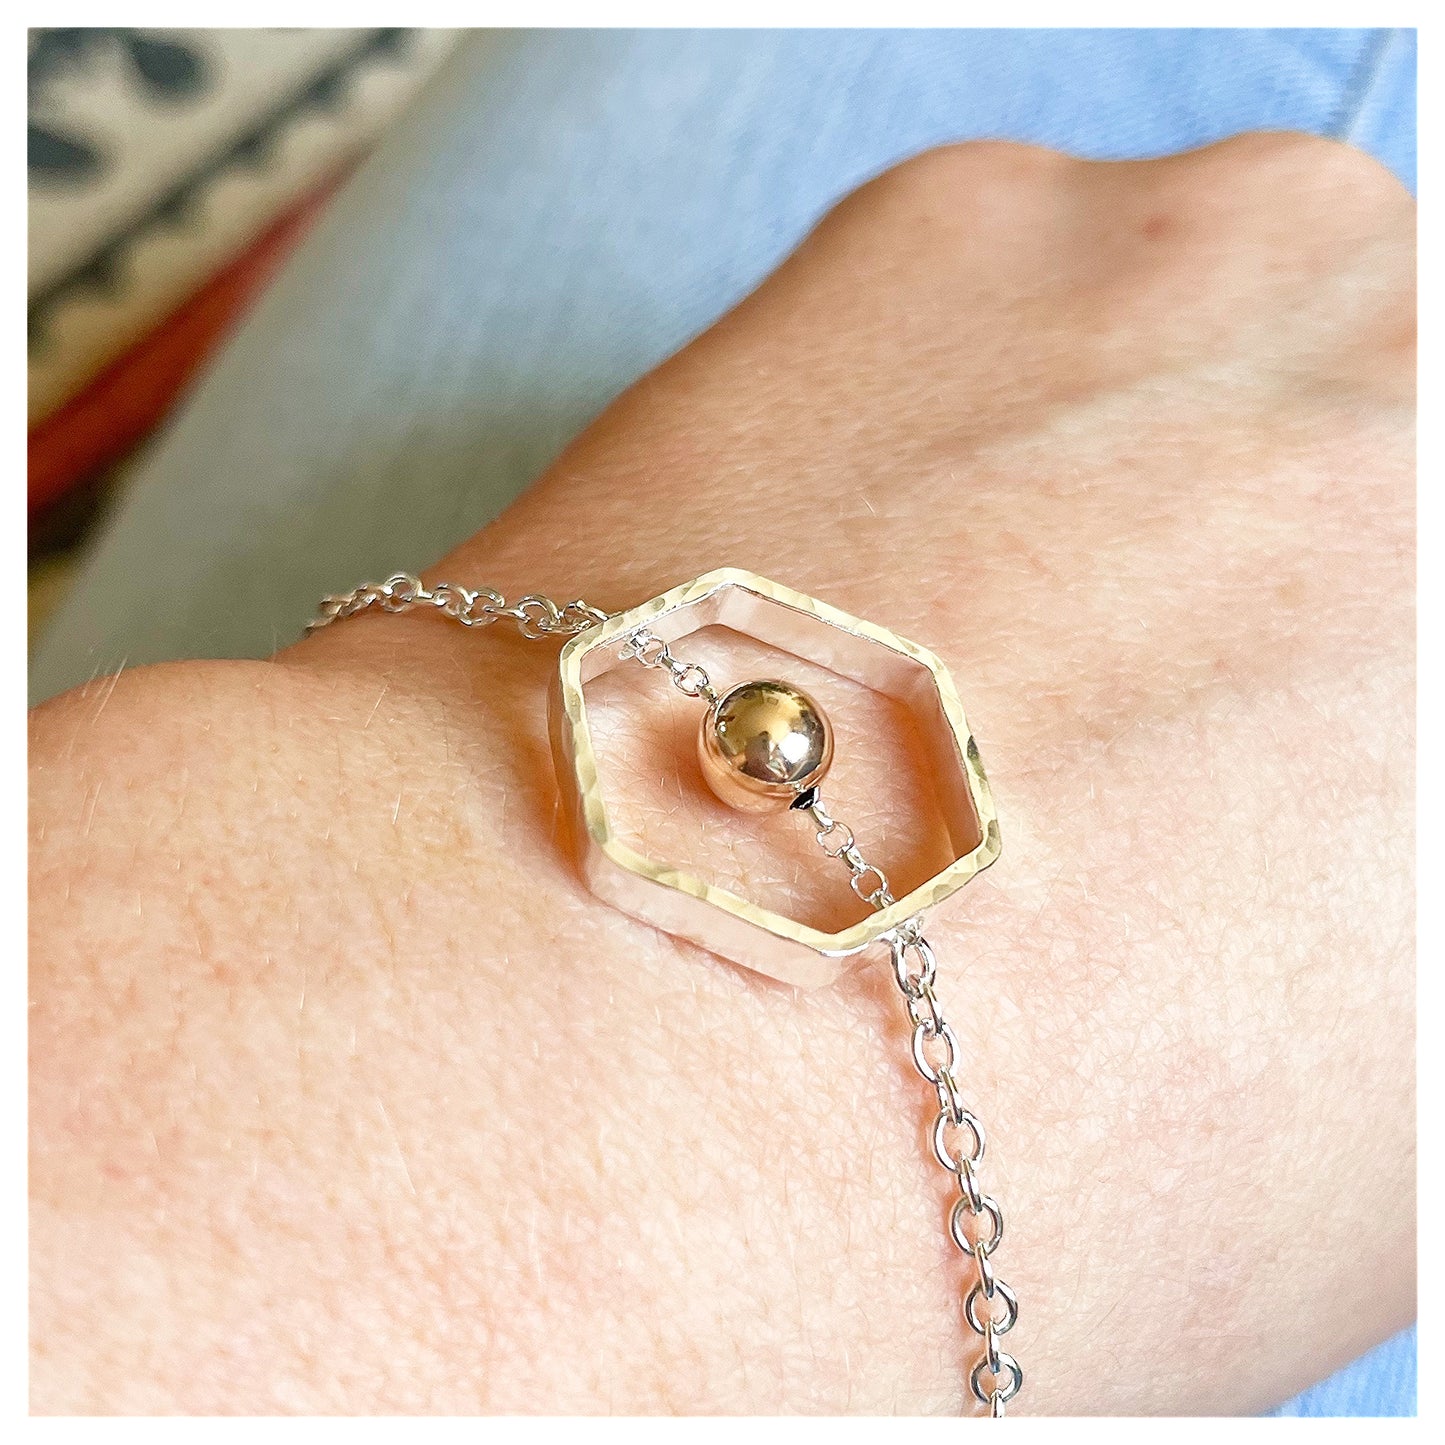 9ct Yellow Gold and Sterling Silver Hexagonal Bracelet with Bead.